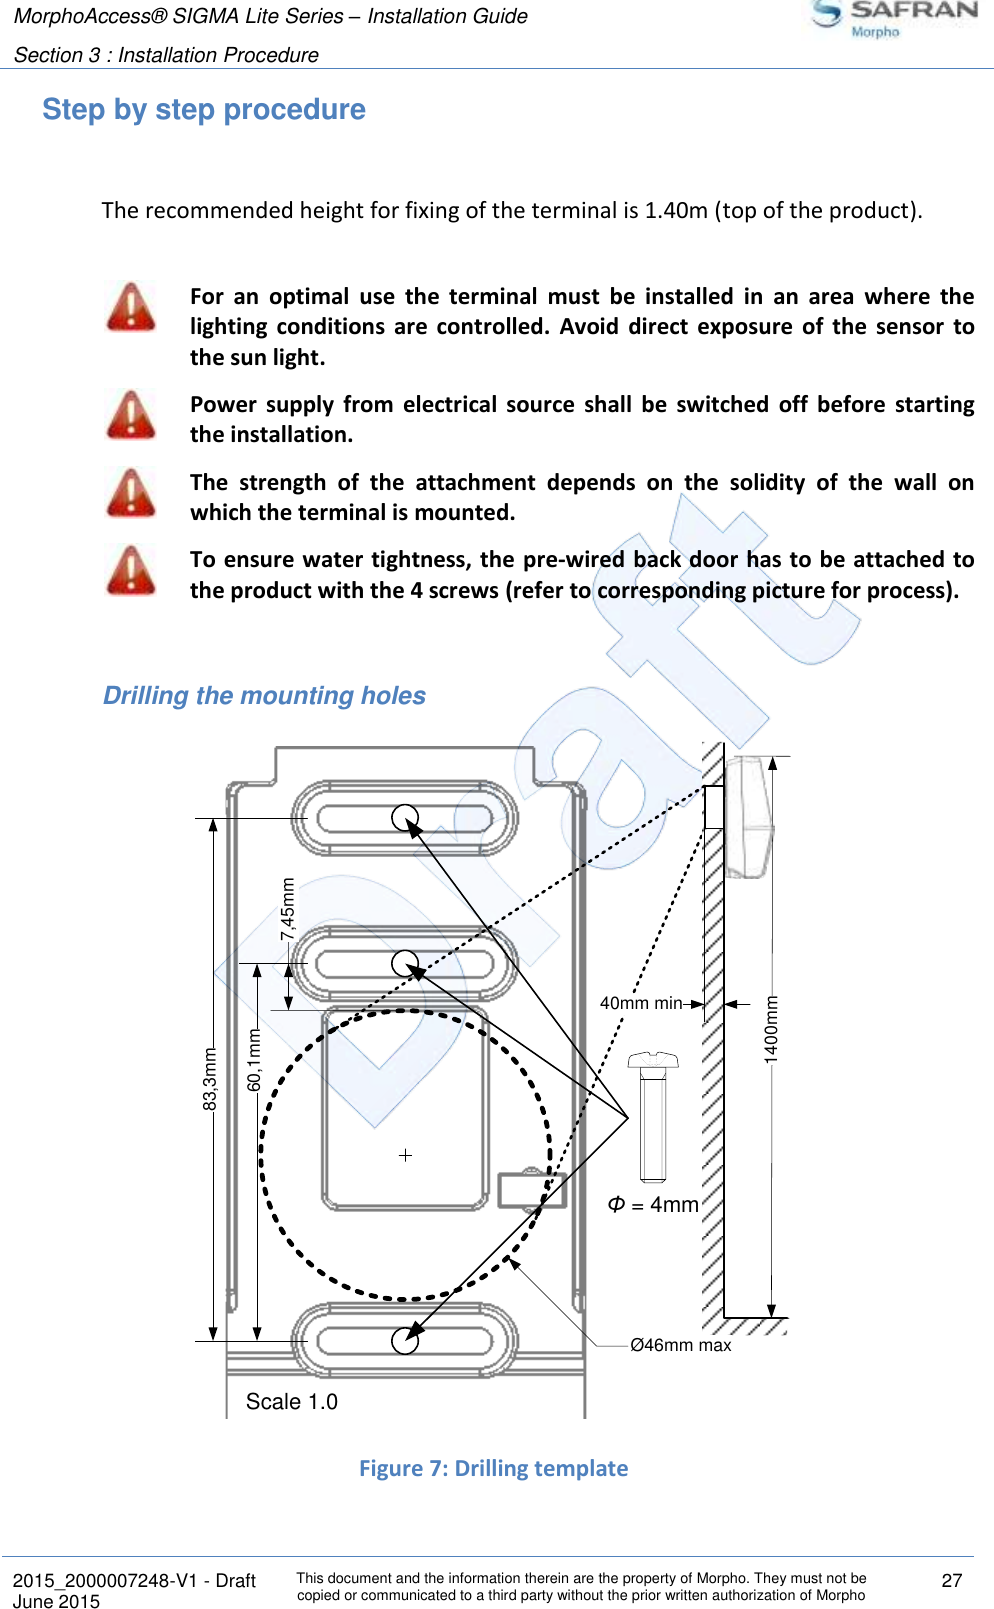 MorphoAccess® SIGMA Lite Series – Installation Guide  Section 3 : Installation Procedure   2015_2000007248-V1 - Draft This document and the information therein are the property of Morpho. They must not be copied or communicated to a third party without the prior written authorization of Morpho 27 June 2015   Step by step procedure  The recommended height for fixing of the terminal is 1.40m (top of the product).   For  an  optimal  use  the  terminal  must  be  installed  in  an  area  where  the lighting  conditions  are  controlled.  Avoid  direct  exposure  of  the  sensor  to the sun light.  Power  supply  from  electrical  source  shall  be  switched  off  before  starting the installation.  The  strength  of  the  attachment  depends  on  the  solidity  of  the  wall  on which the terminal is mounted.  To ensure water tightness, the  pre-wired back door has to be attached to the product with the 4 screws (refer to corresponding picture for process).  Drilling the mounting holes  Figure 7: Drilling template 60,1mmScale 1.0Φ = 4mm83,3mm7,45mm1400mm40mm minØ46mm max